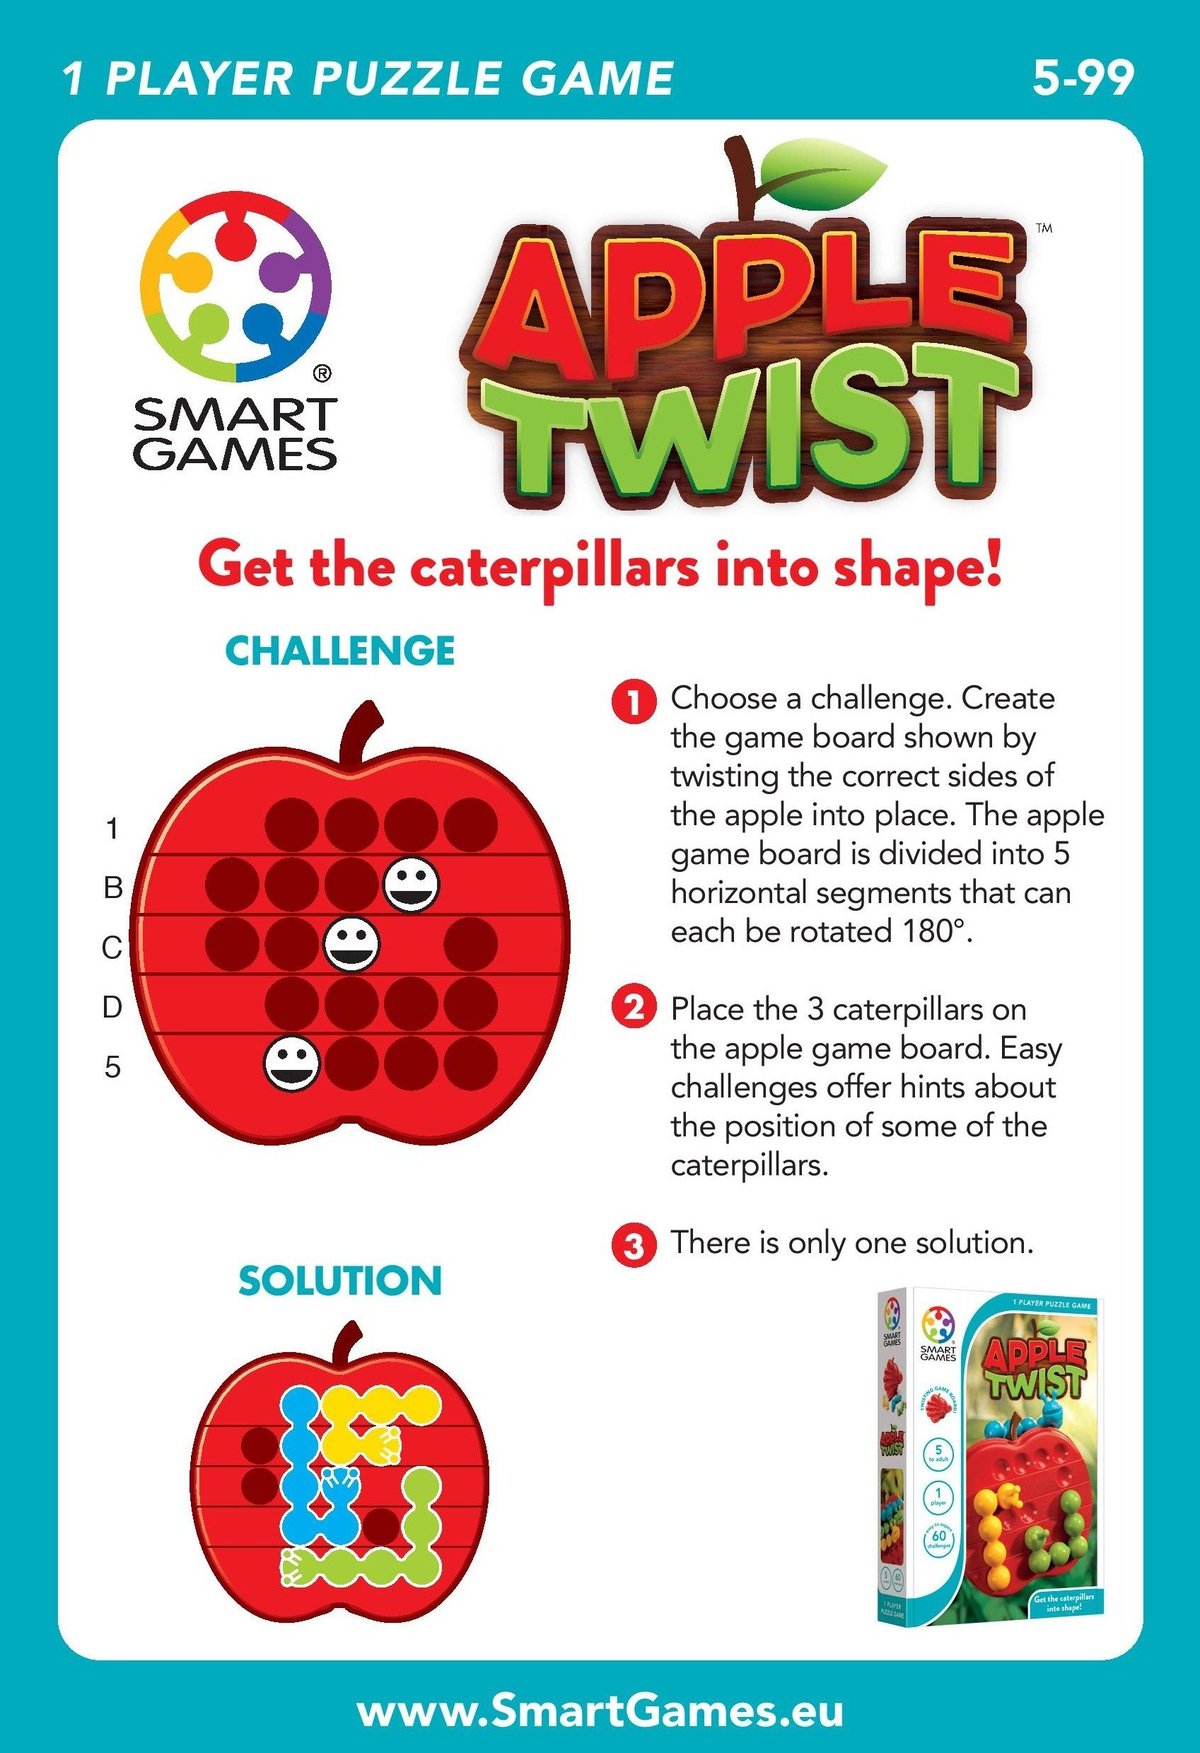 How to play Apple Twist - SmartGames 